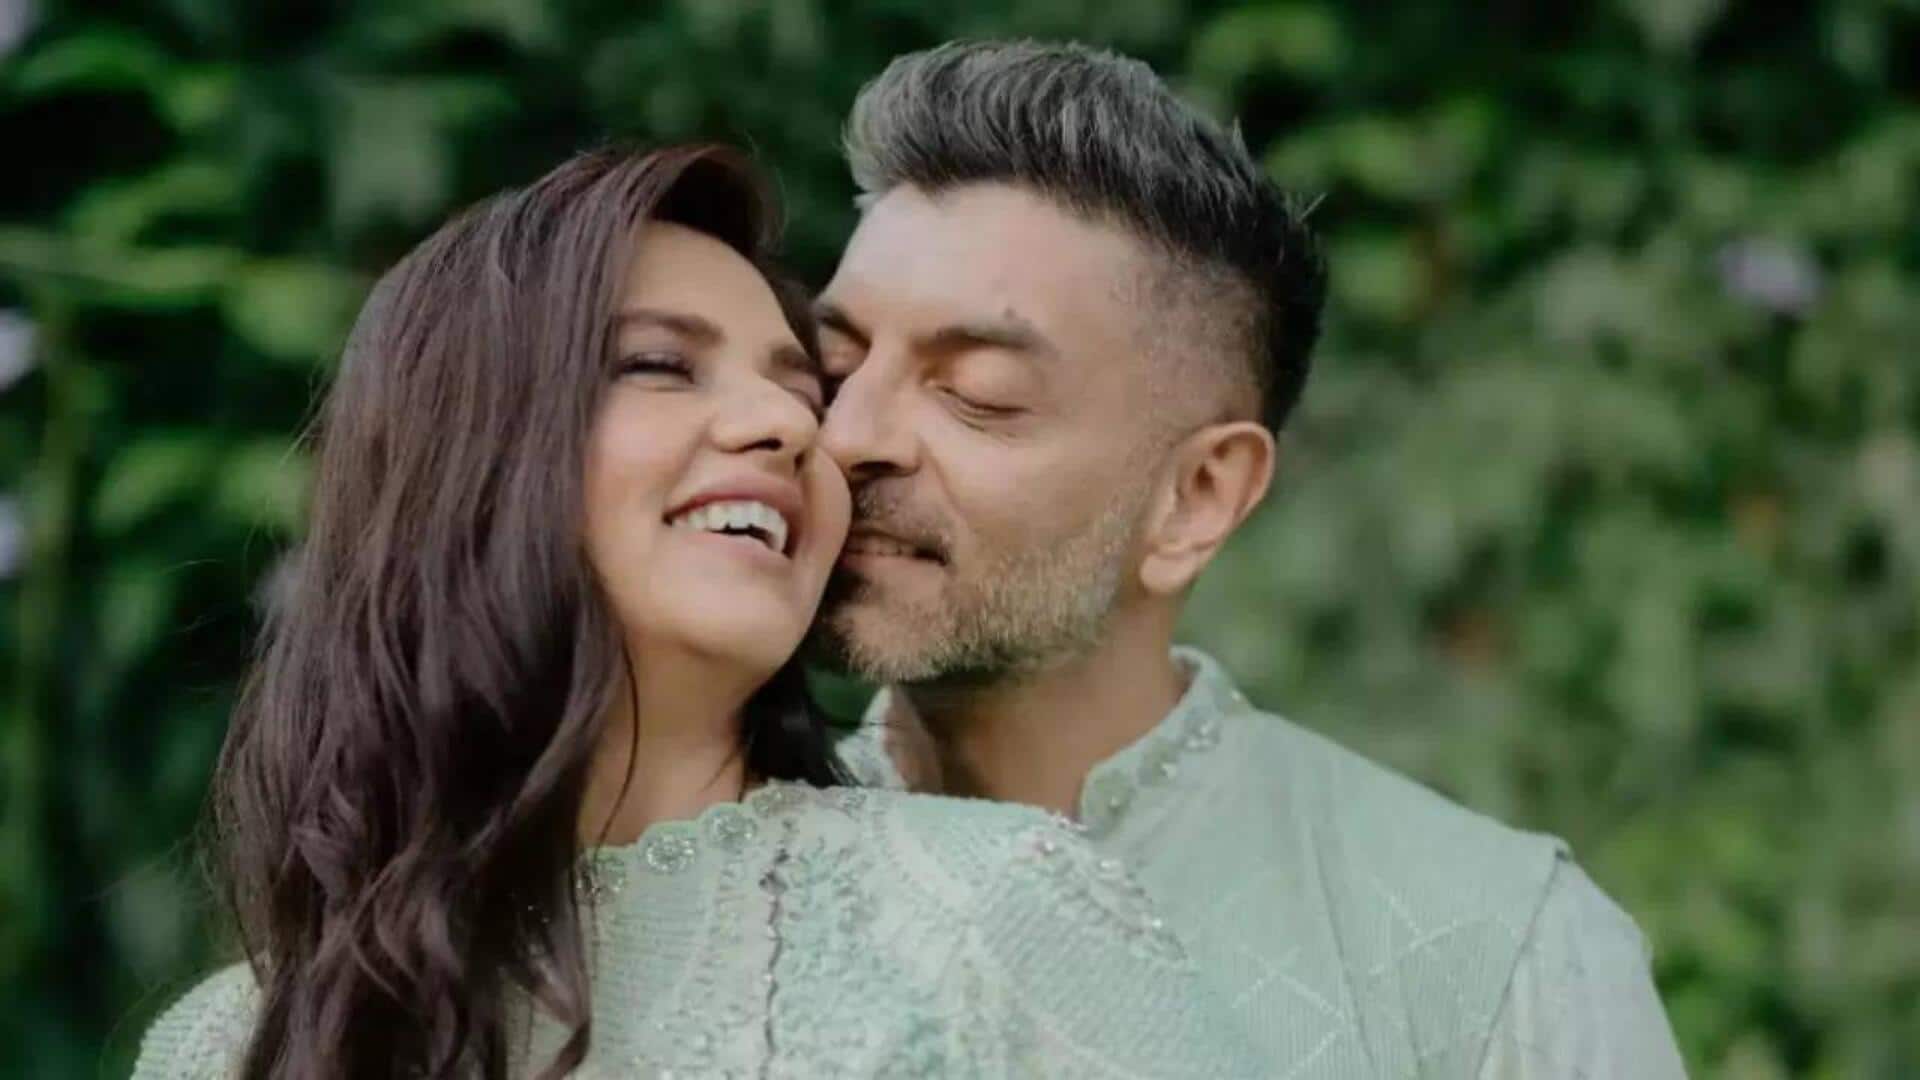 Amid cheating claims, Dalljiet Kaur accuses husband of 'denying marriage'